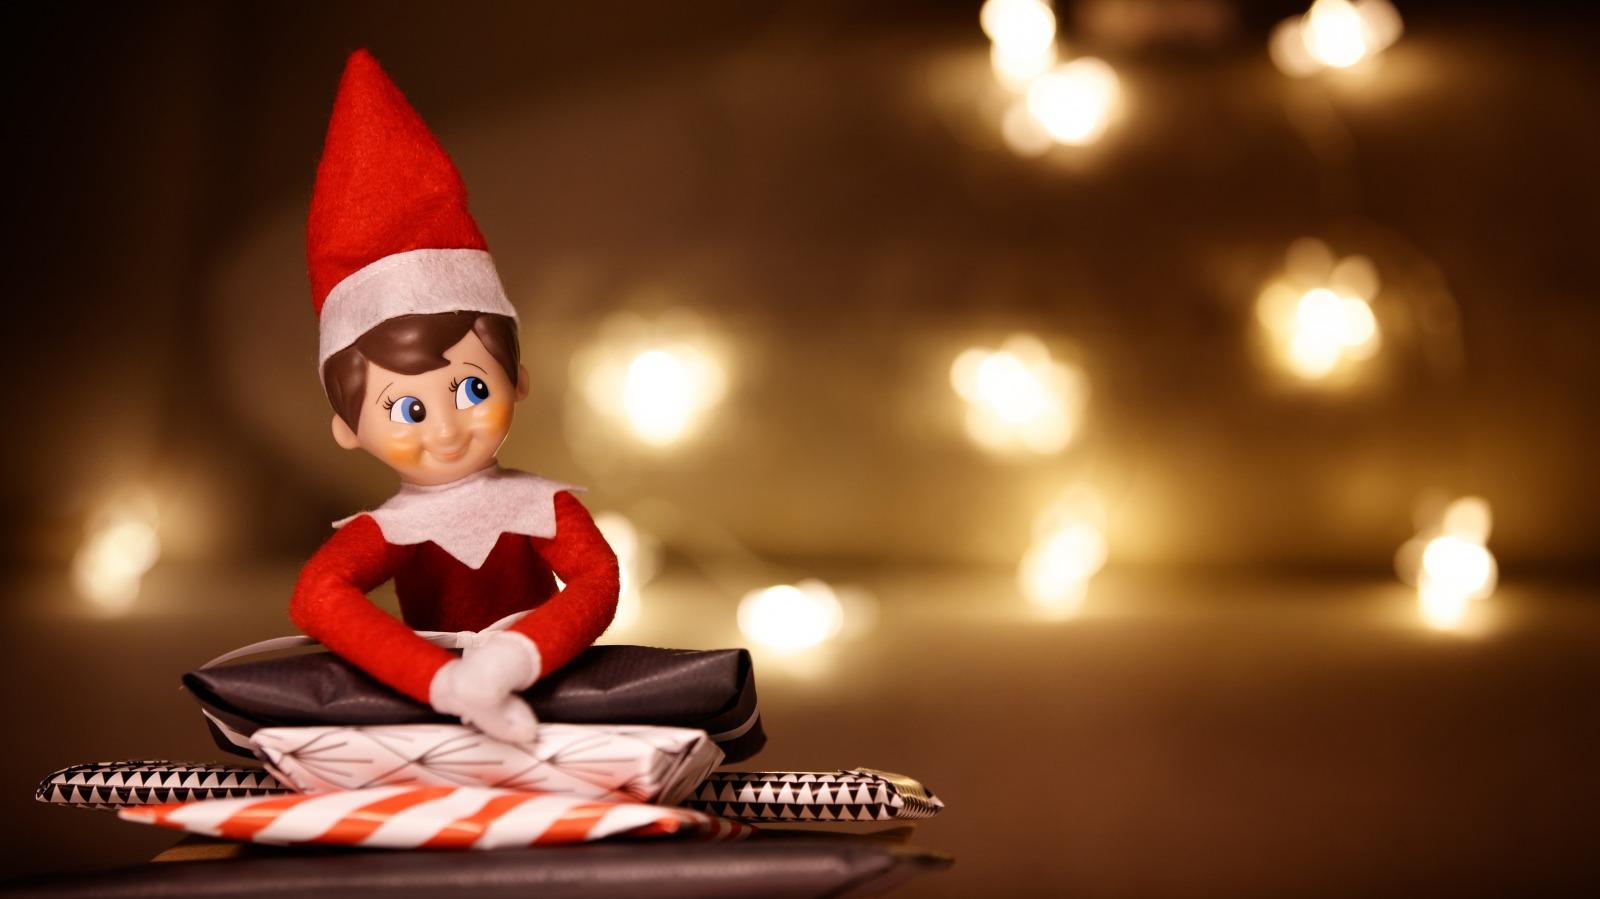 The Elf On The Shelf Just Got Its Own Cereal